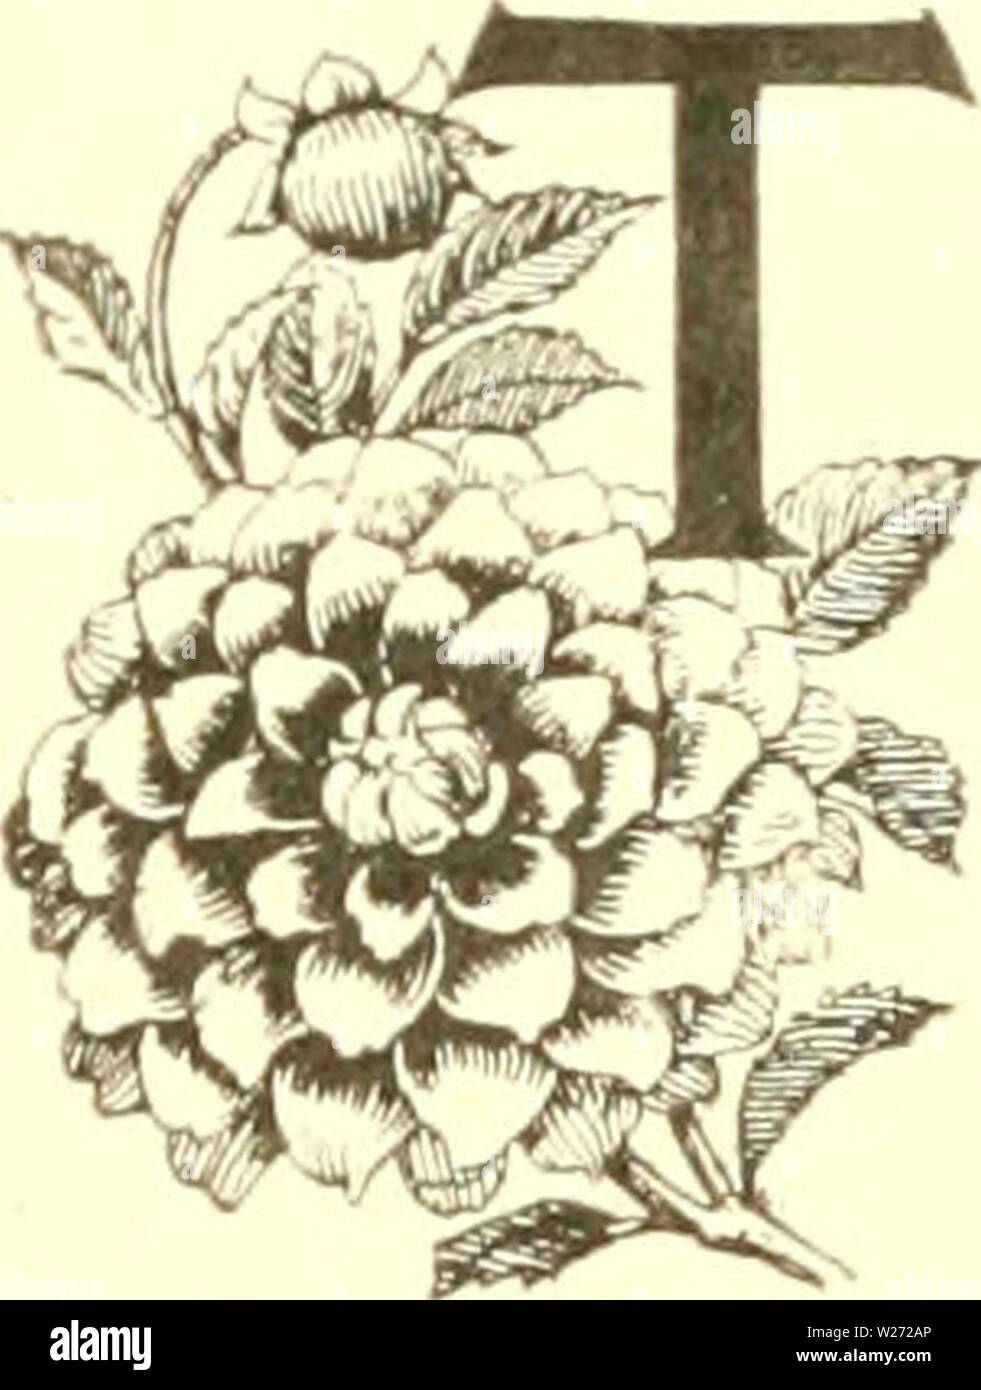 Archive image from page 33 of The Dahlia  a practical. The Dahlia : a practical treatise on its habits, characteristics, cultivation and history  dahliapracticalt00peac Year: 1896  22 THE DAHLIA. CHAPTER V. GARDEX CULTIVATION.    HE garden is the place pre-eminently adapted to Dahlia culture. It is here that they may be grown, in all their loveliness, with so little care and expense that no lover of flowers can afford to be without them. They grow so luxuriantly and bloom so profusely that even a few plants, properly cared for, will furnish a fresh bouquet almost daily from June until frost, w Stock Photo